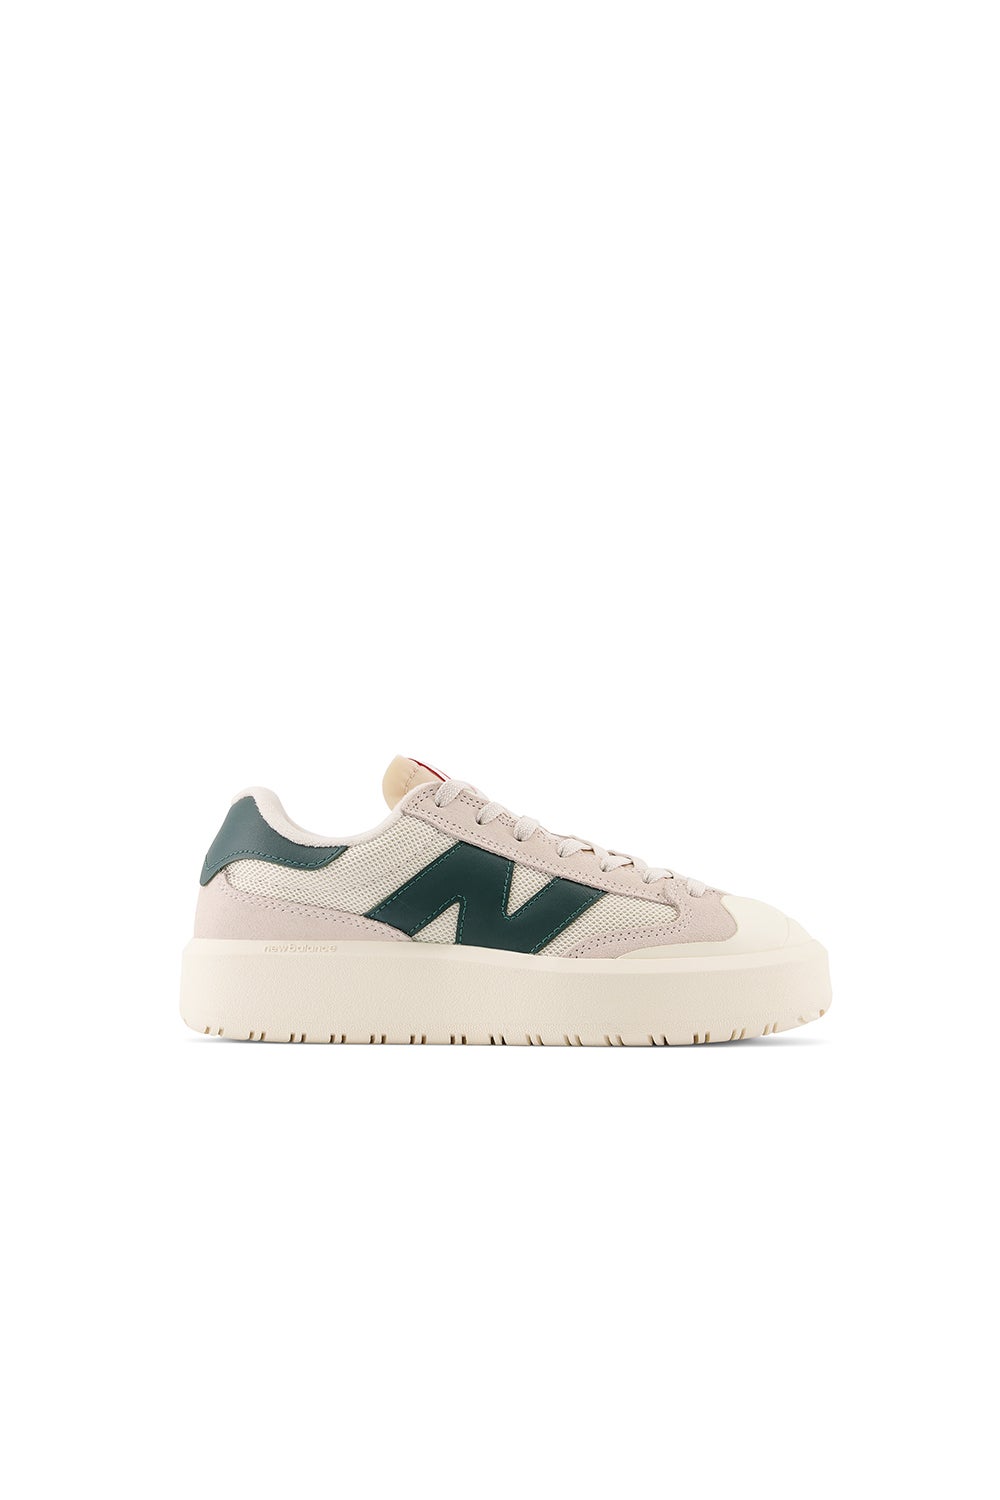 New Balance CT302 White with Nightwatch Green